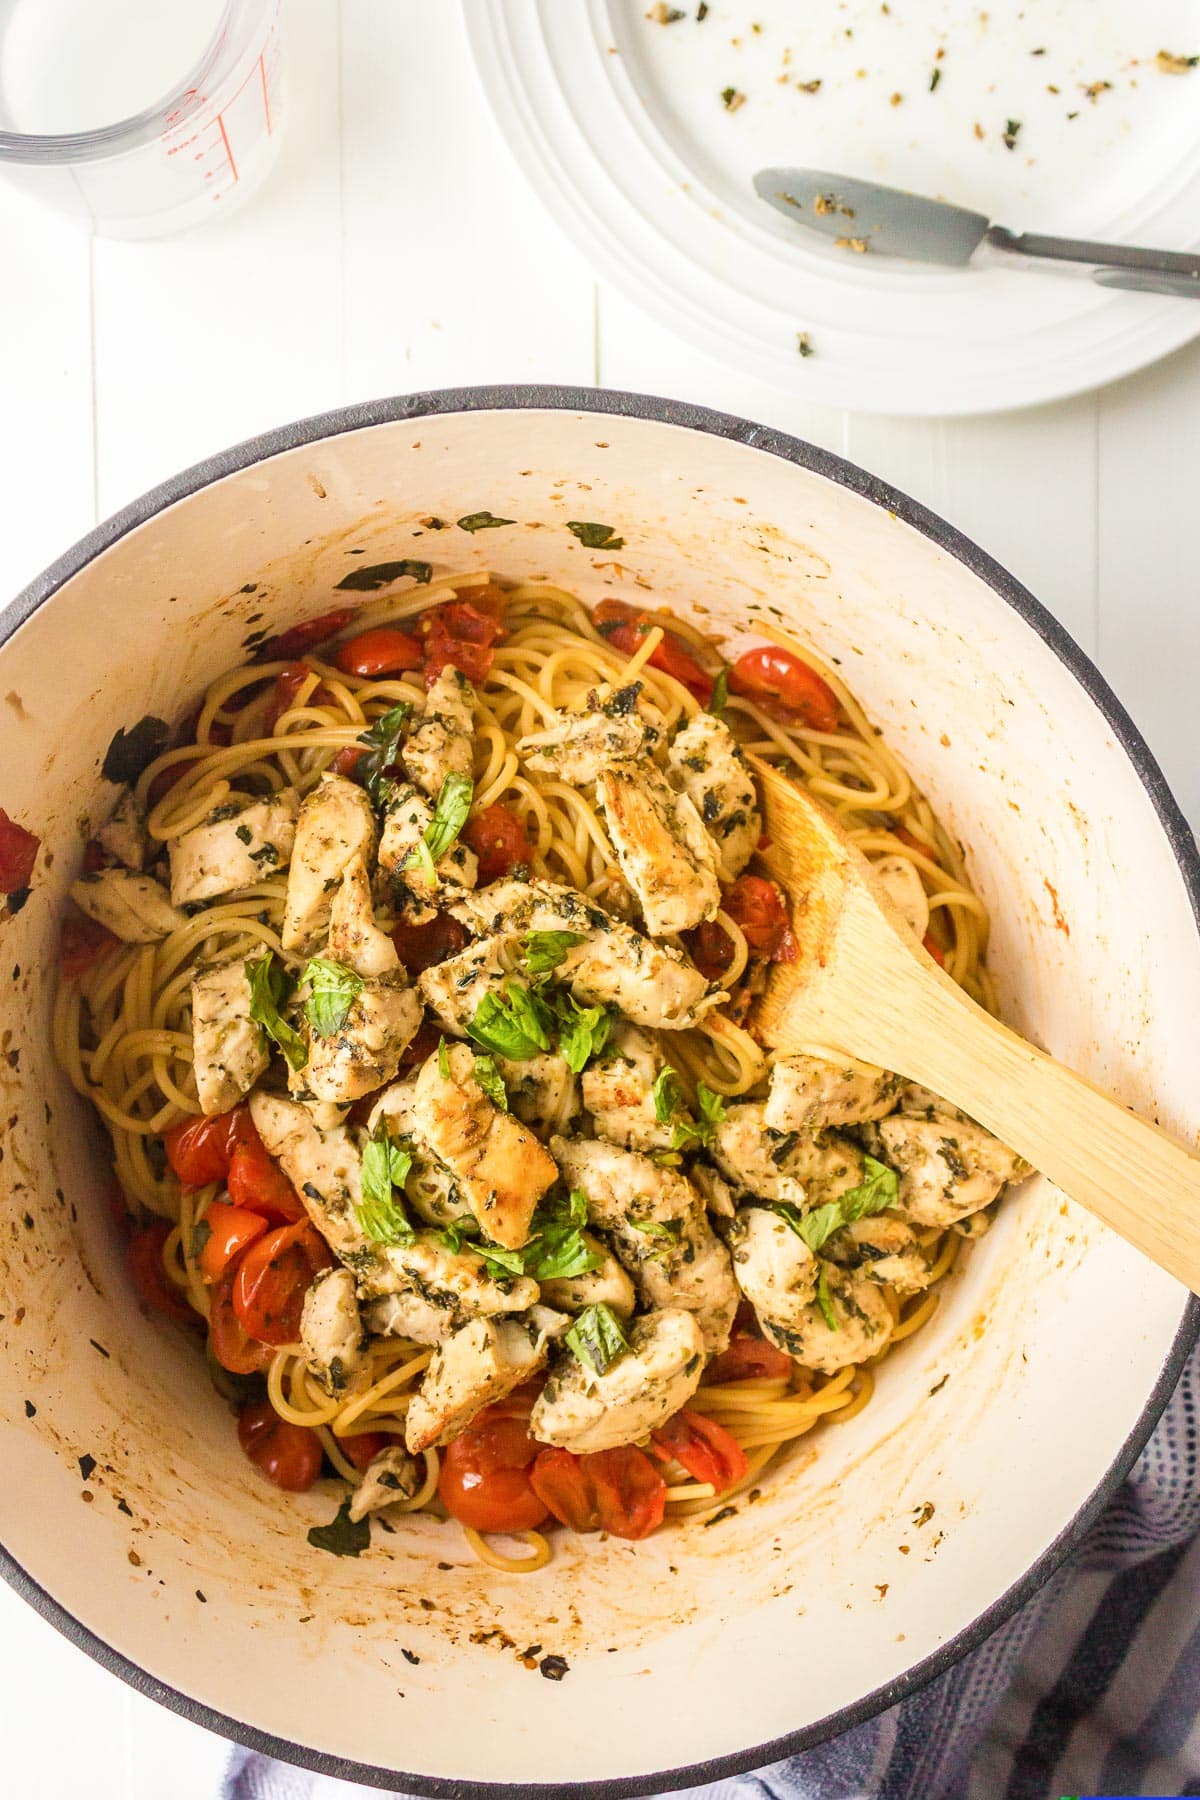 A pot of spaghetti with grilled chicken, cherry tomatoes, and basil, served with a wooden spoon, on a white tabletop.